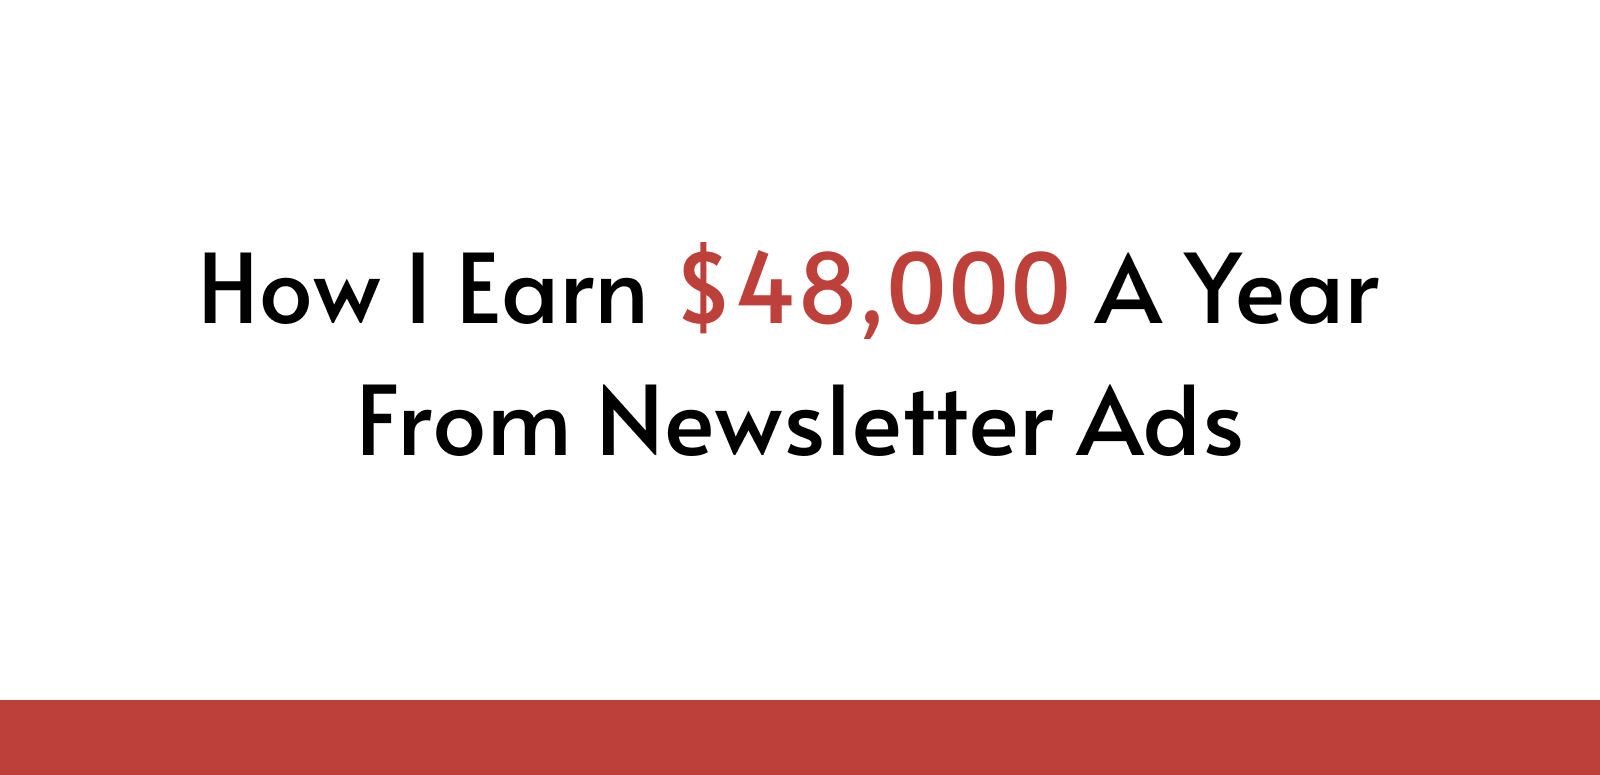 How I Earn $48,000 A Year From Newsletter Ads